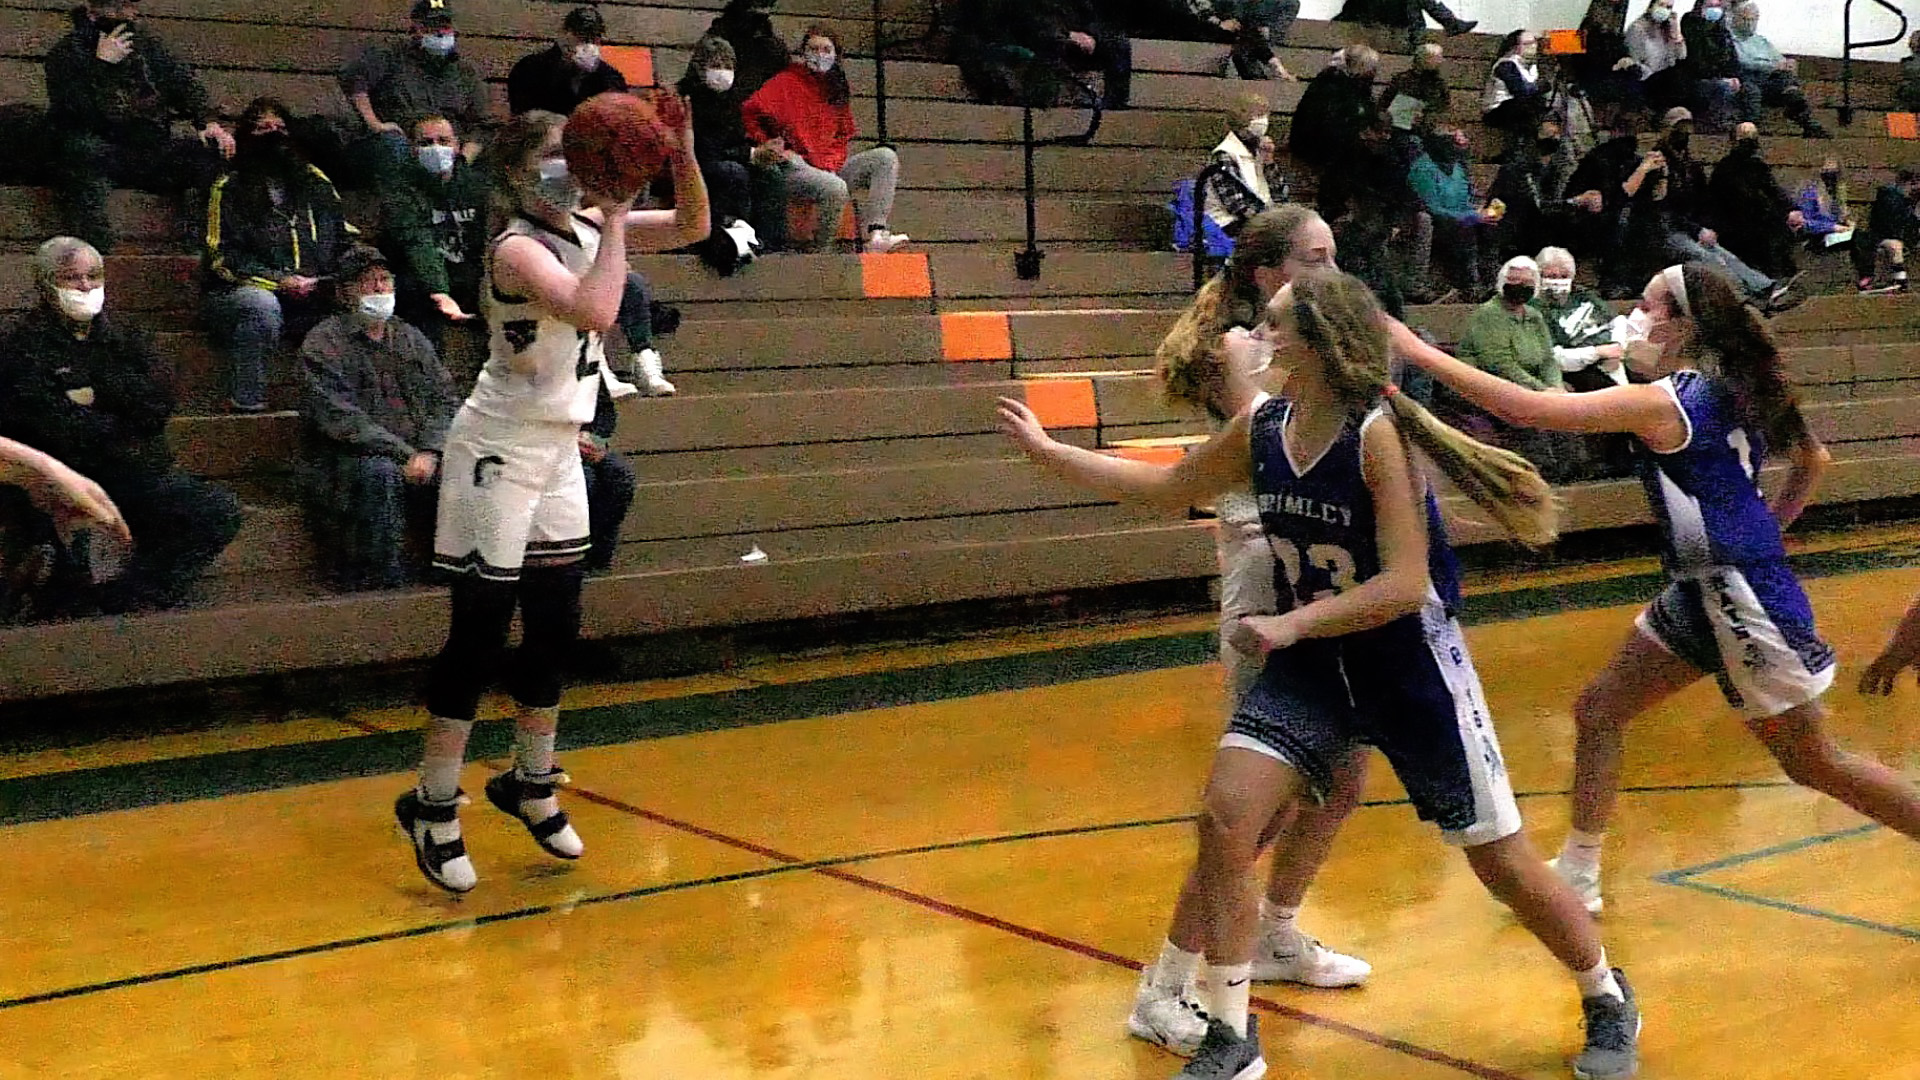 TAYLOR WILLIAMS FIRES IN A THREEL IN FIRST QUARTER ACTION AGAINST BRIMLEY THURSDAY EVENING.